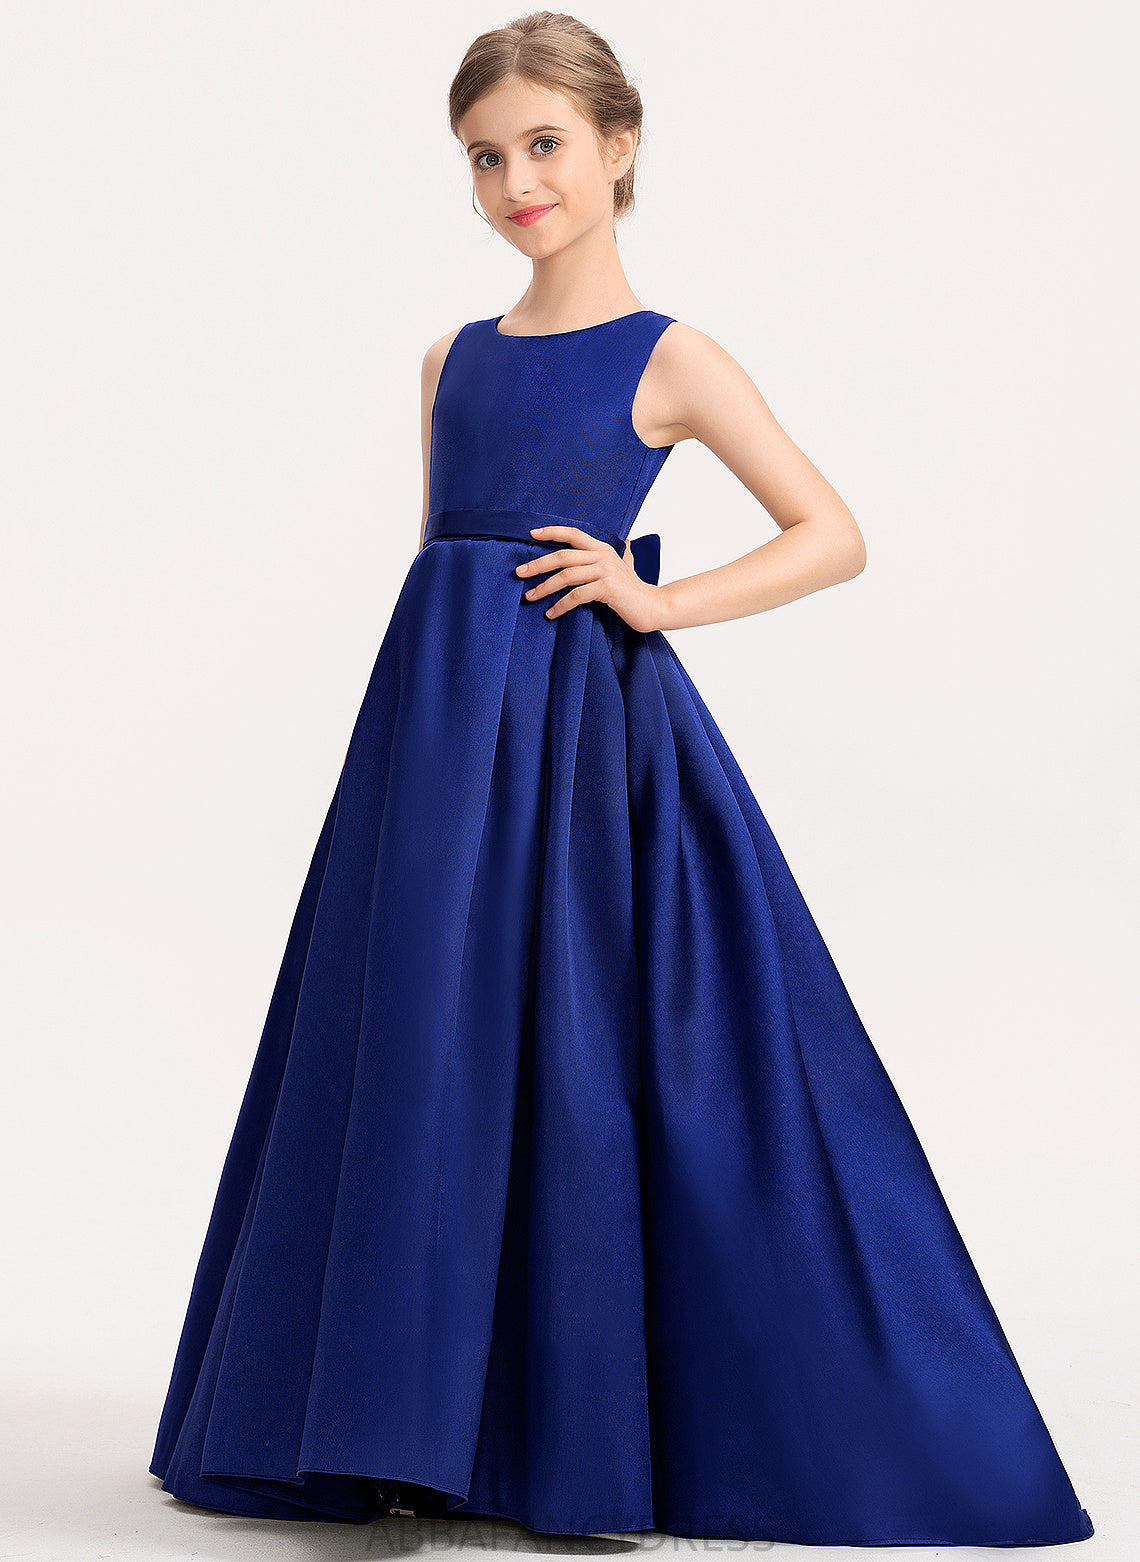 Neck Sweep Salma Scoop Bow(s) Satin Junior Bridesmaid Dresses Ball-Gown/Princess Train With